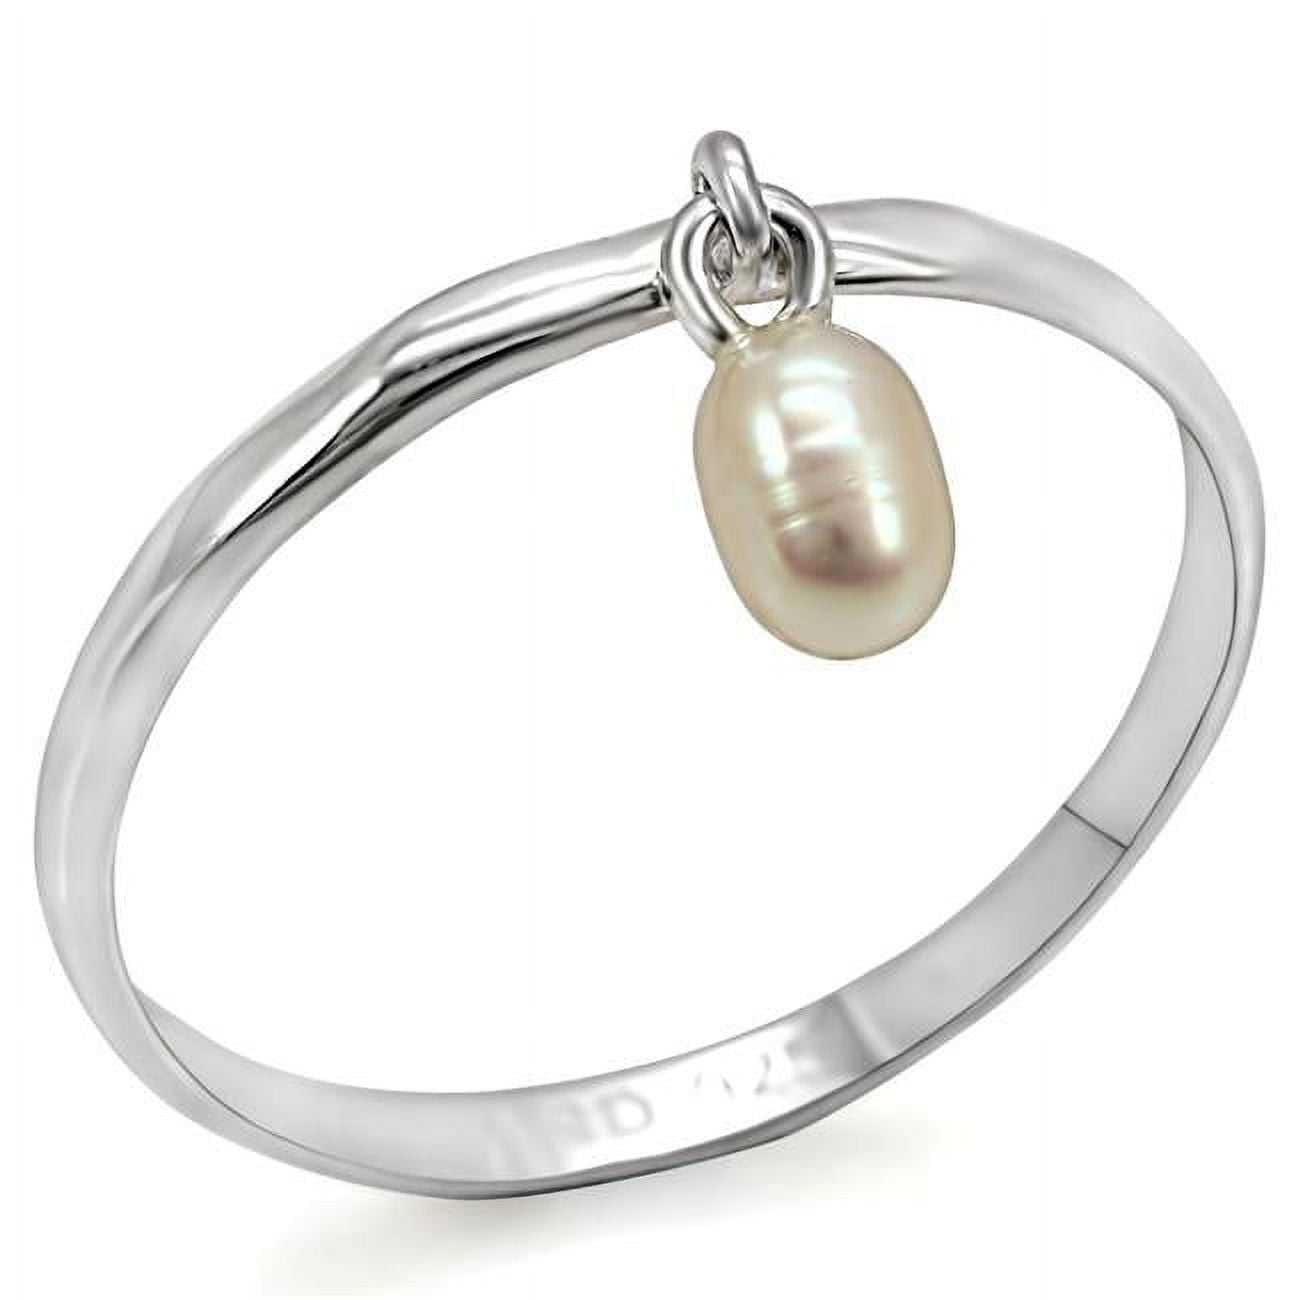 Picture of Alamode LOS317-5 Women Silver 925 Sterling Silver Ring with Semi-Precious in White - Size 5